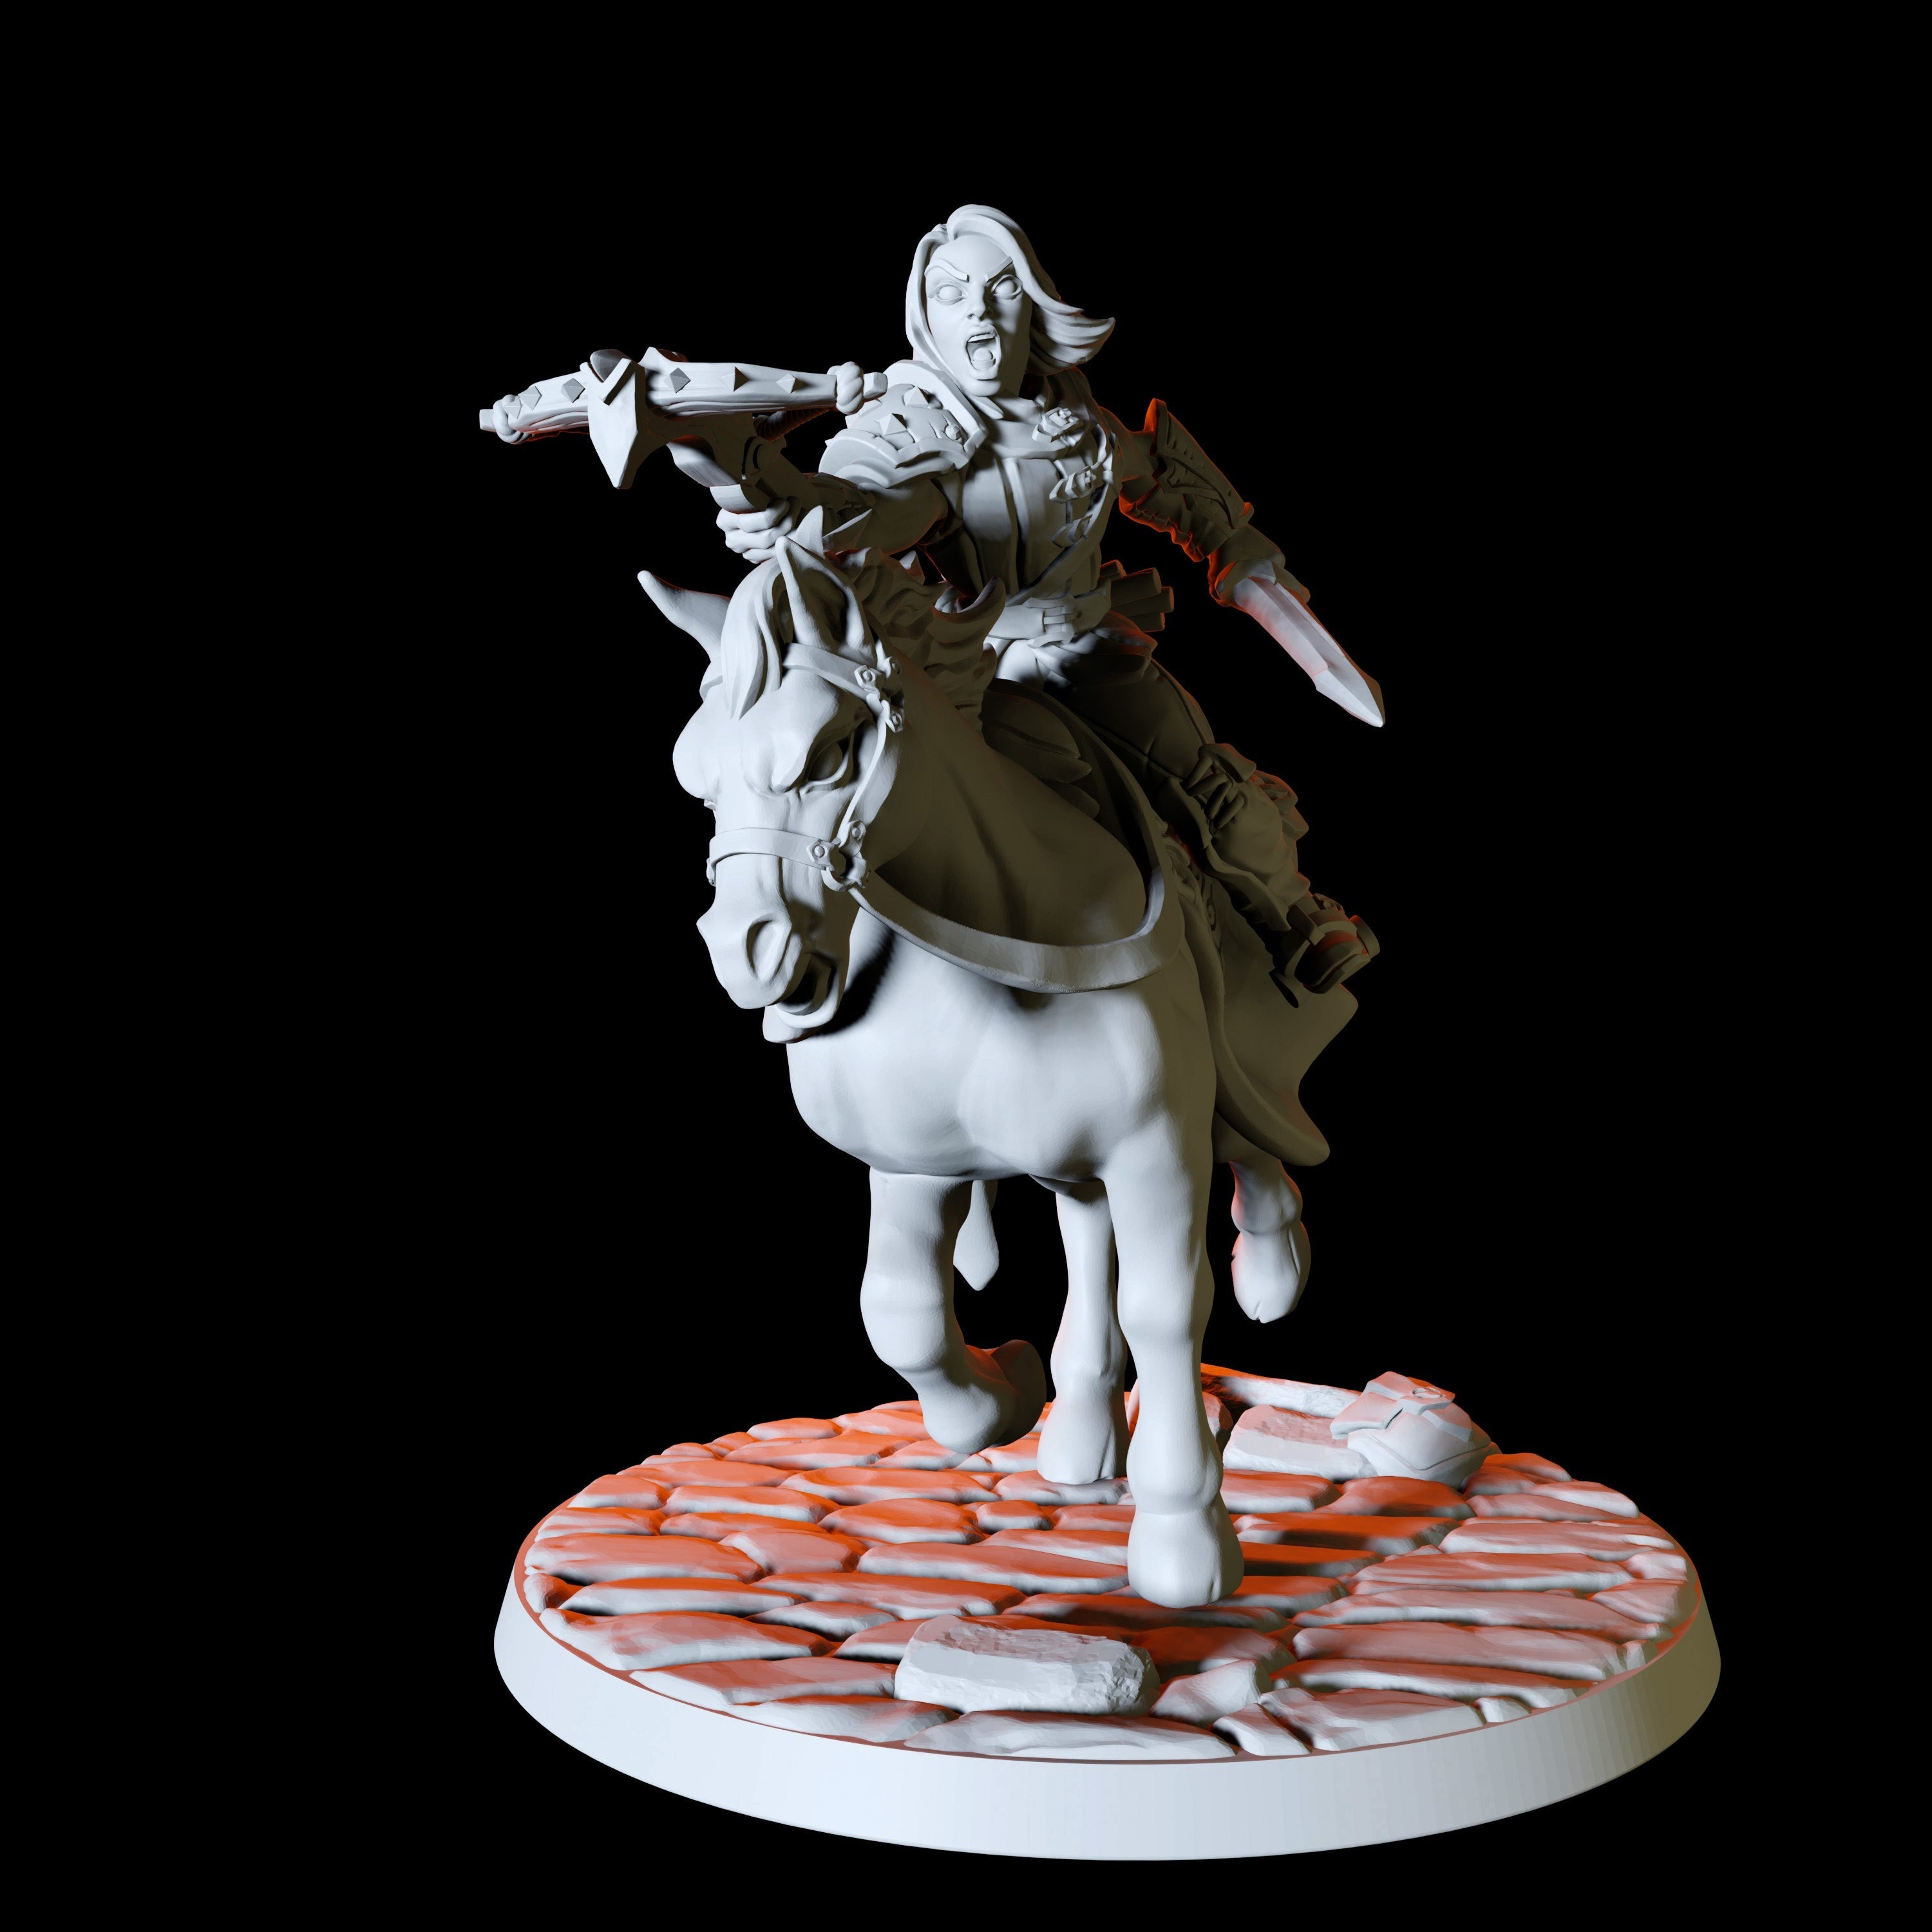 Three Rogues on Horseback Miniatures for Dungeons and Dragons - Myth Forged